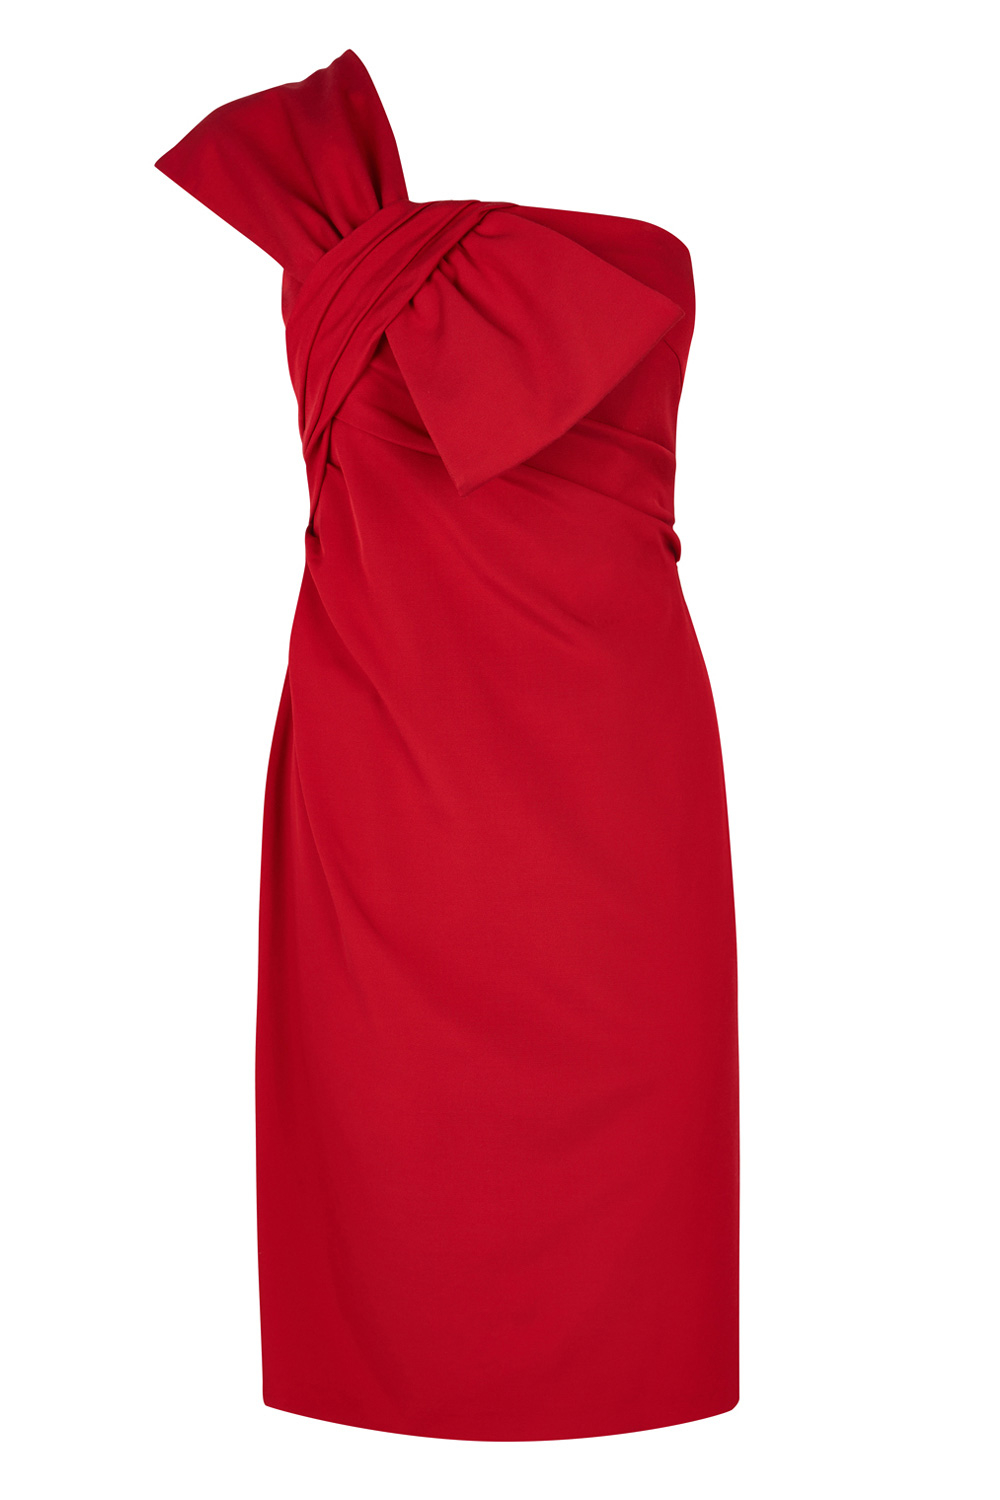 Lyst - Coast Ainslee Bow Dress in Red